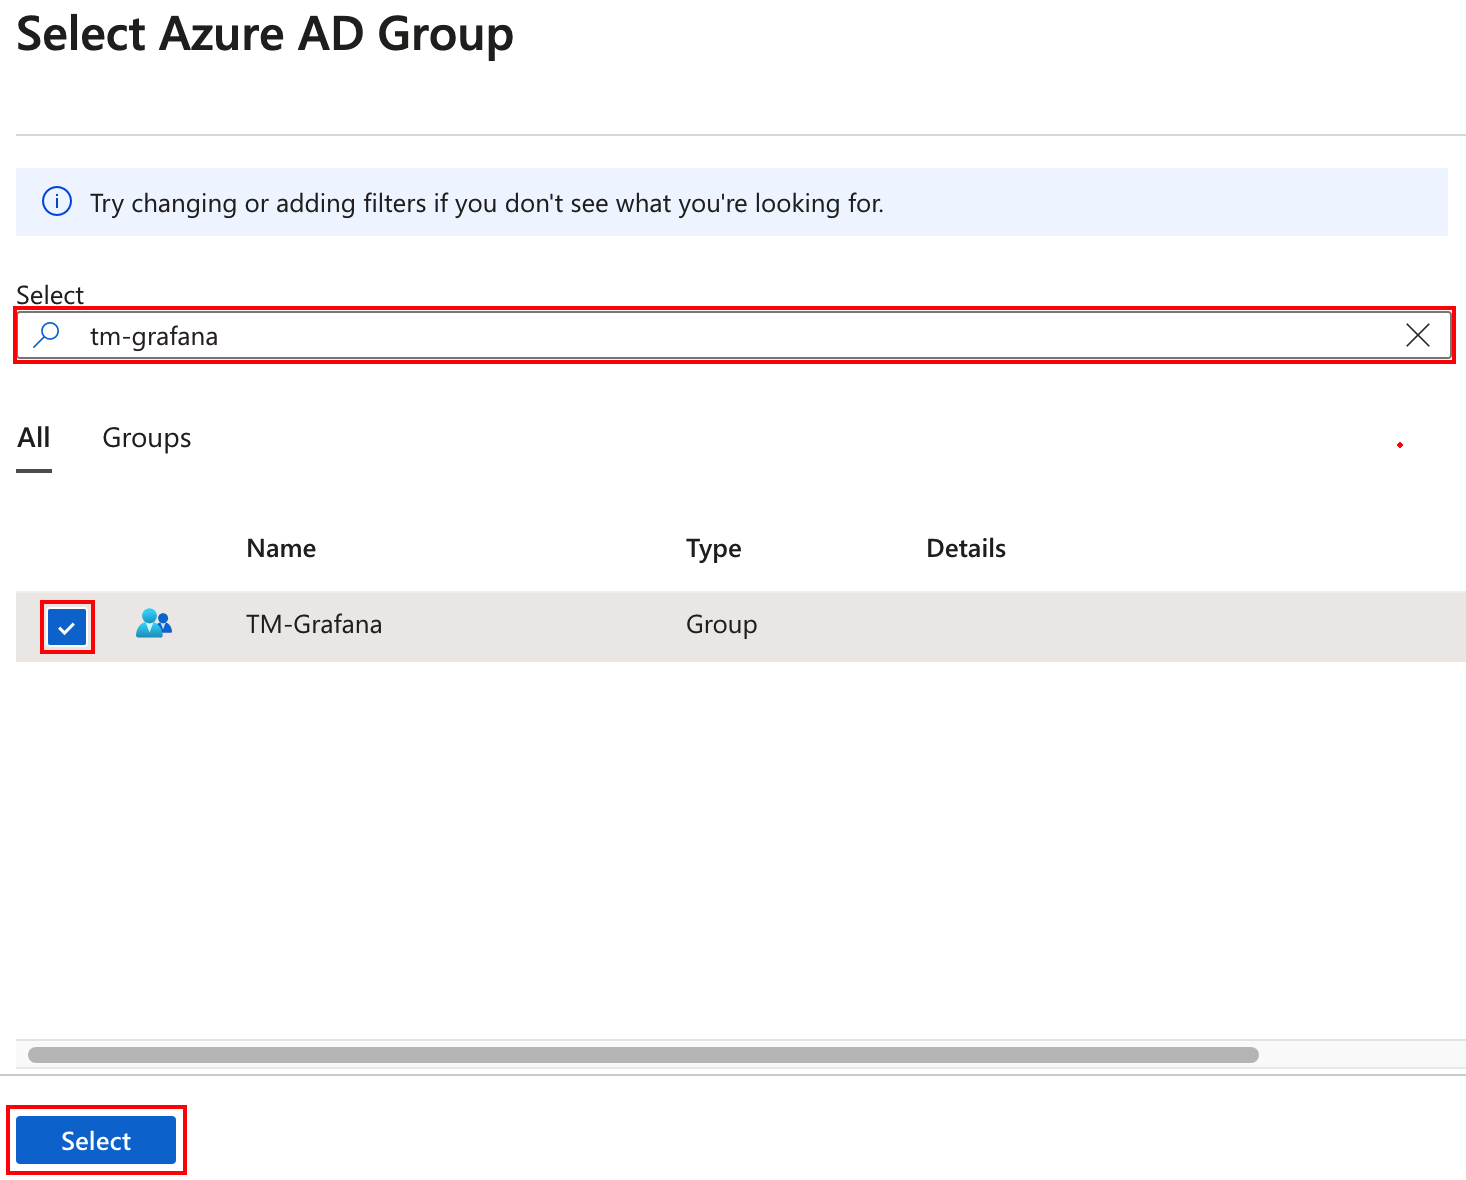 Screenshot of the Azure portal. Finding and selecting a Microsoft Entra group.